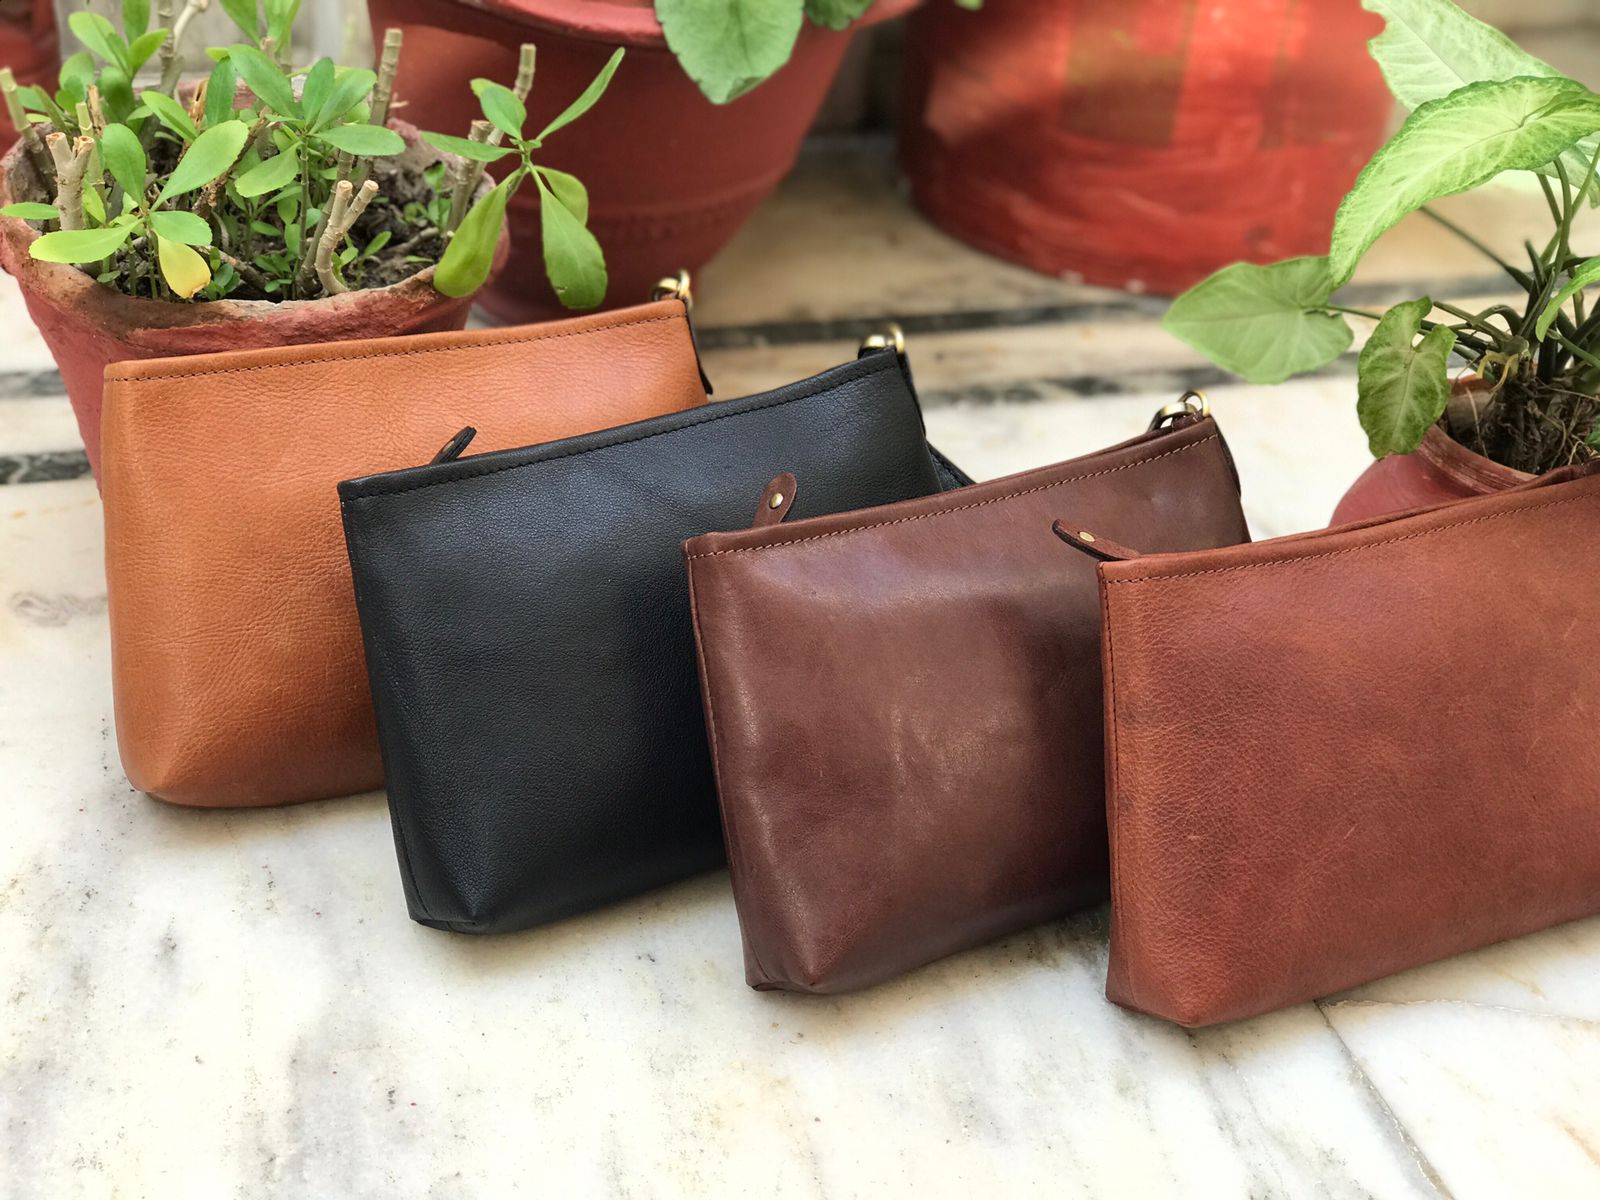 Send Gifts for Mom India - Ladies Leather Purse, Handbag, Mother